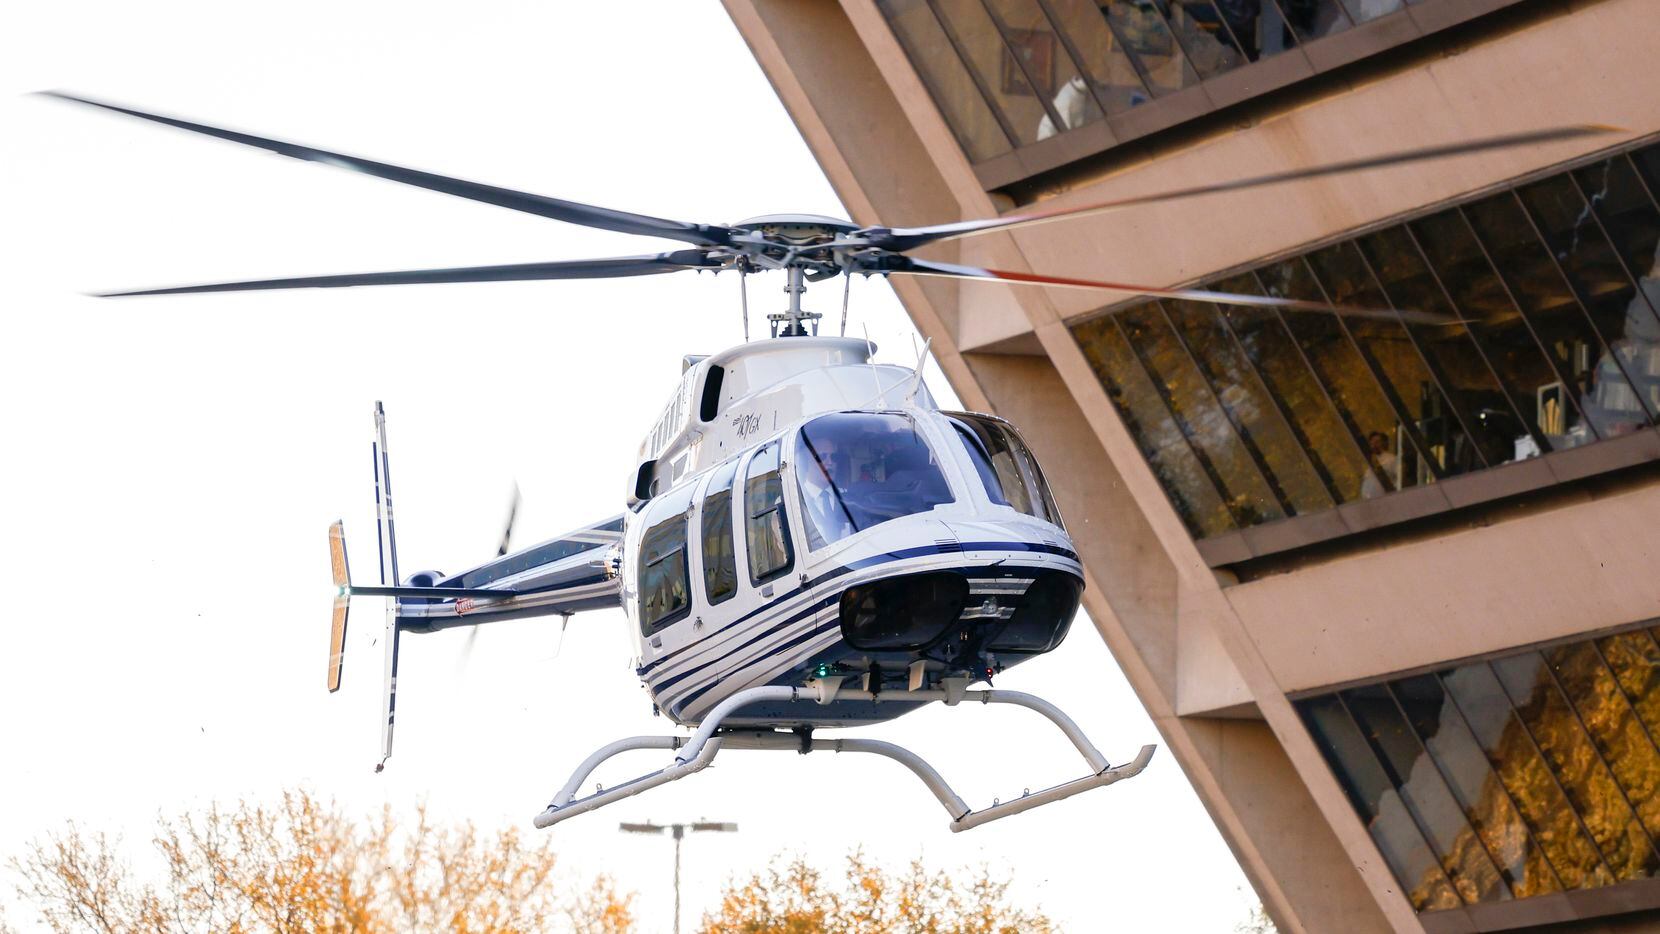 The Dallas Police Department’s newly acquired helicopter lands at City Hall on Wednesday.